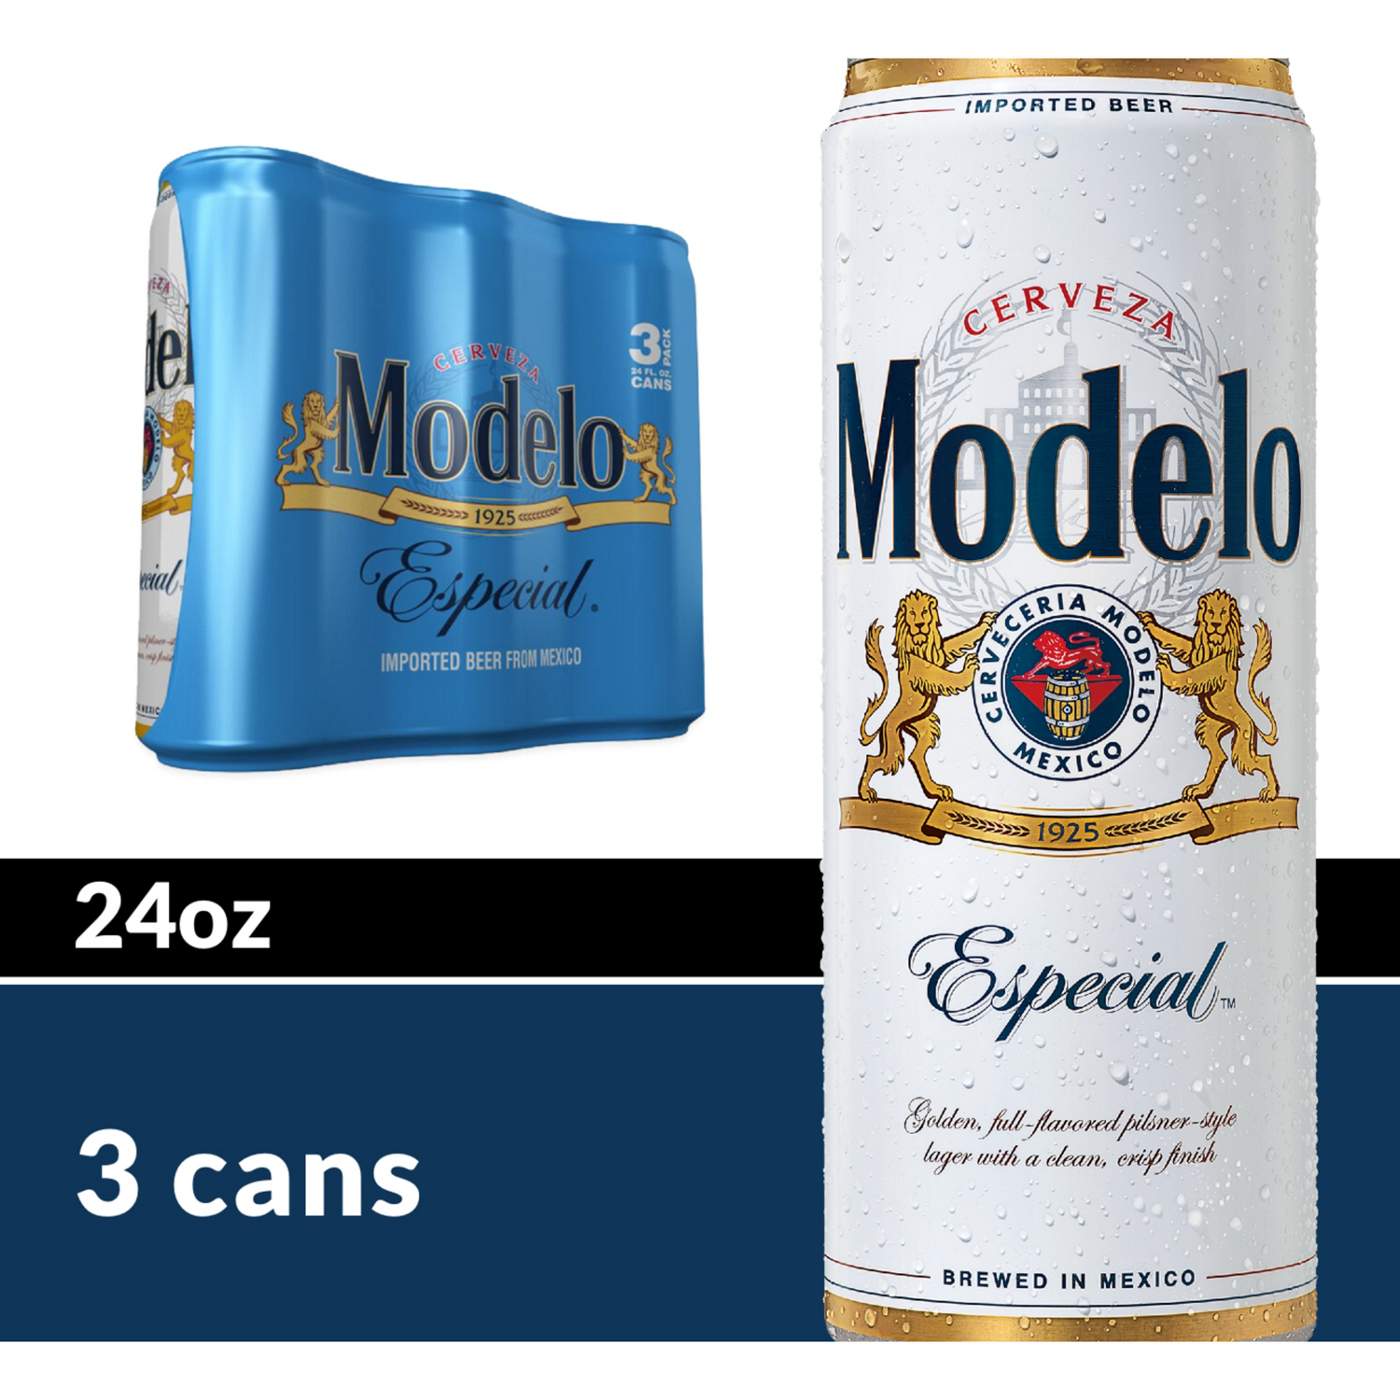 Modelo Especial Mexican Lager Import Beer 24 oz Cans, 3 pk; image 6 of 10